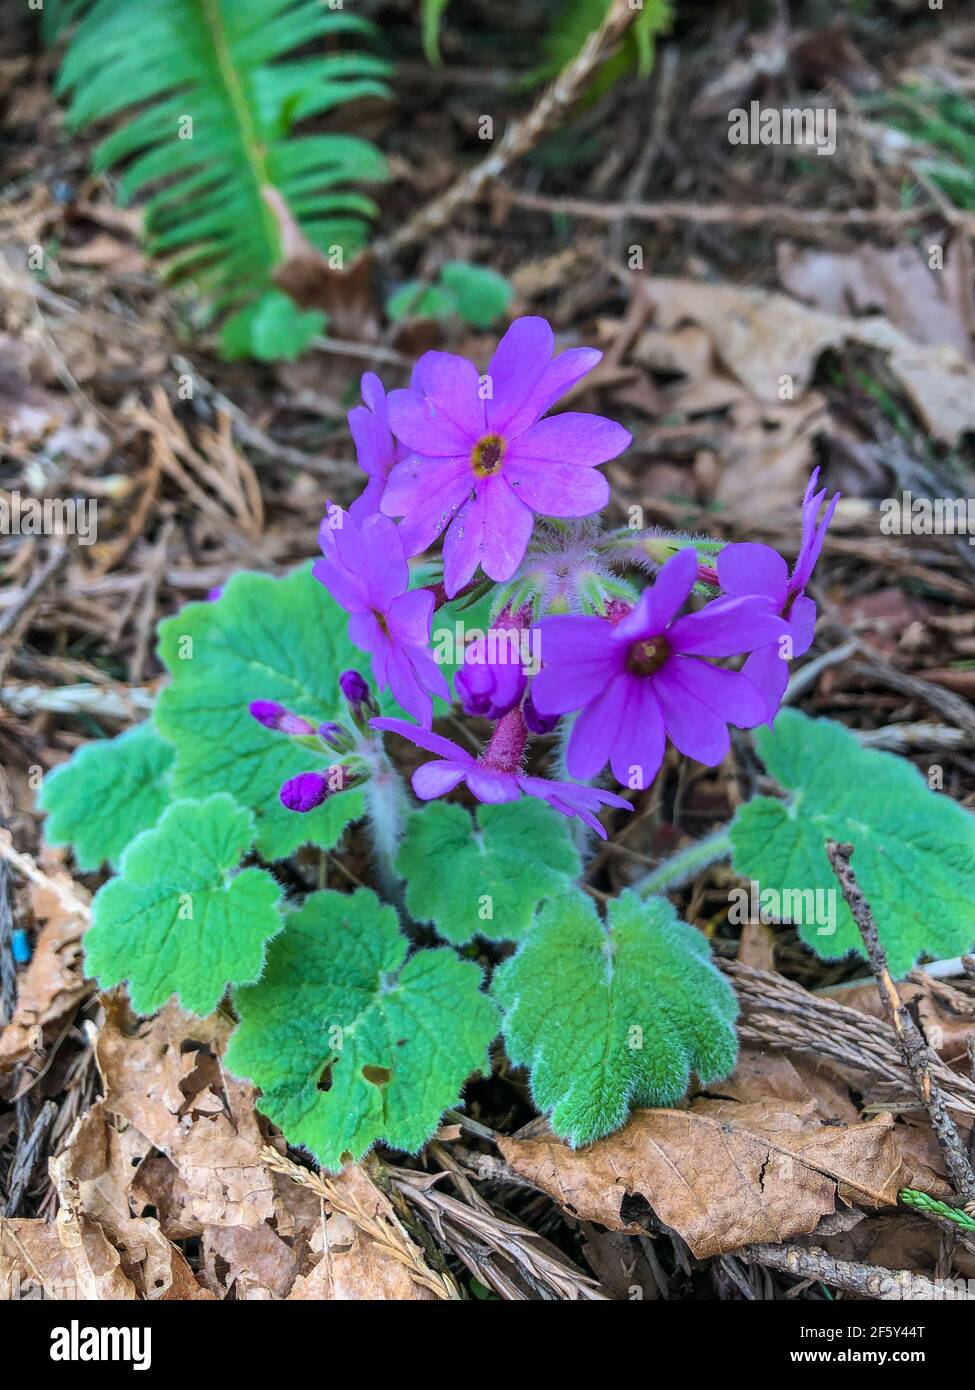 Hardy primrose (Primula kisoana) is an herbaceous perennial that is primarily grown for its deep rose to rose mauve flowers which bloom in spring abov Stock Photo